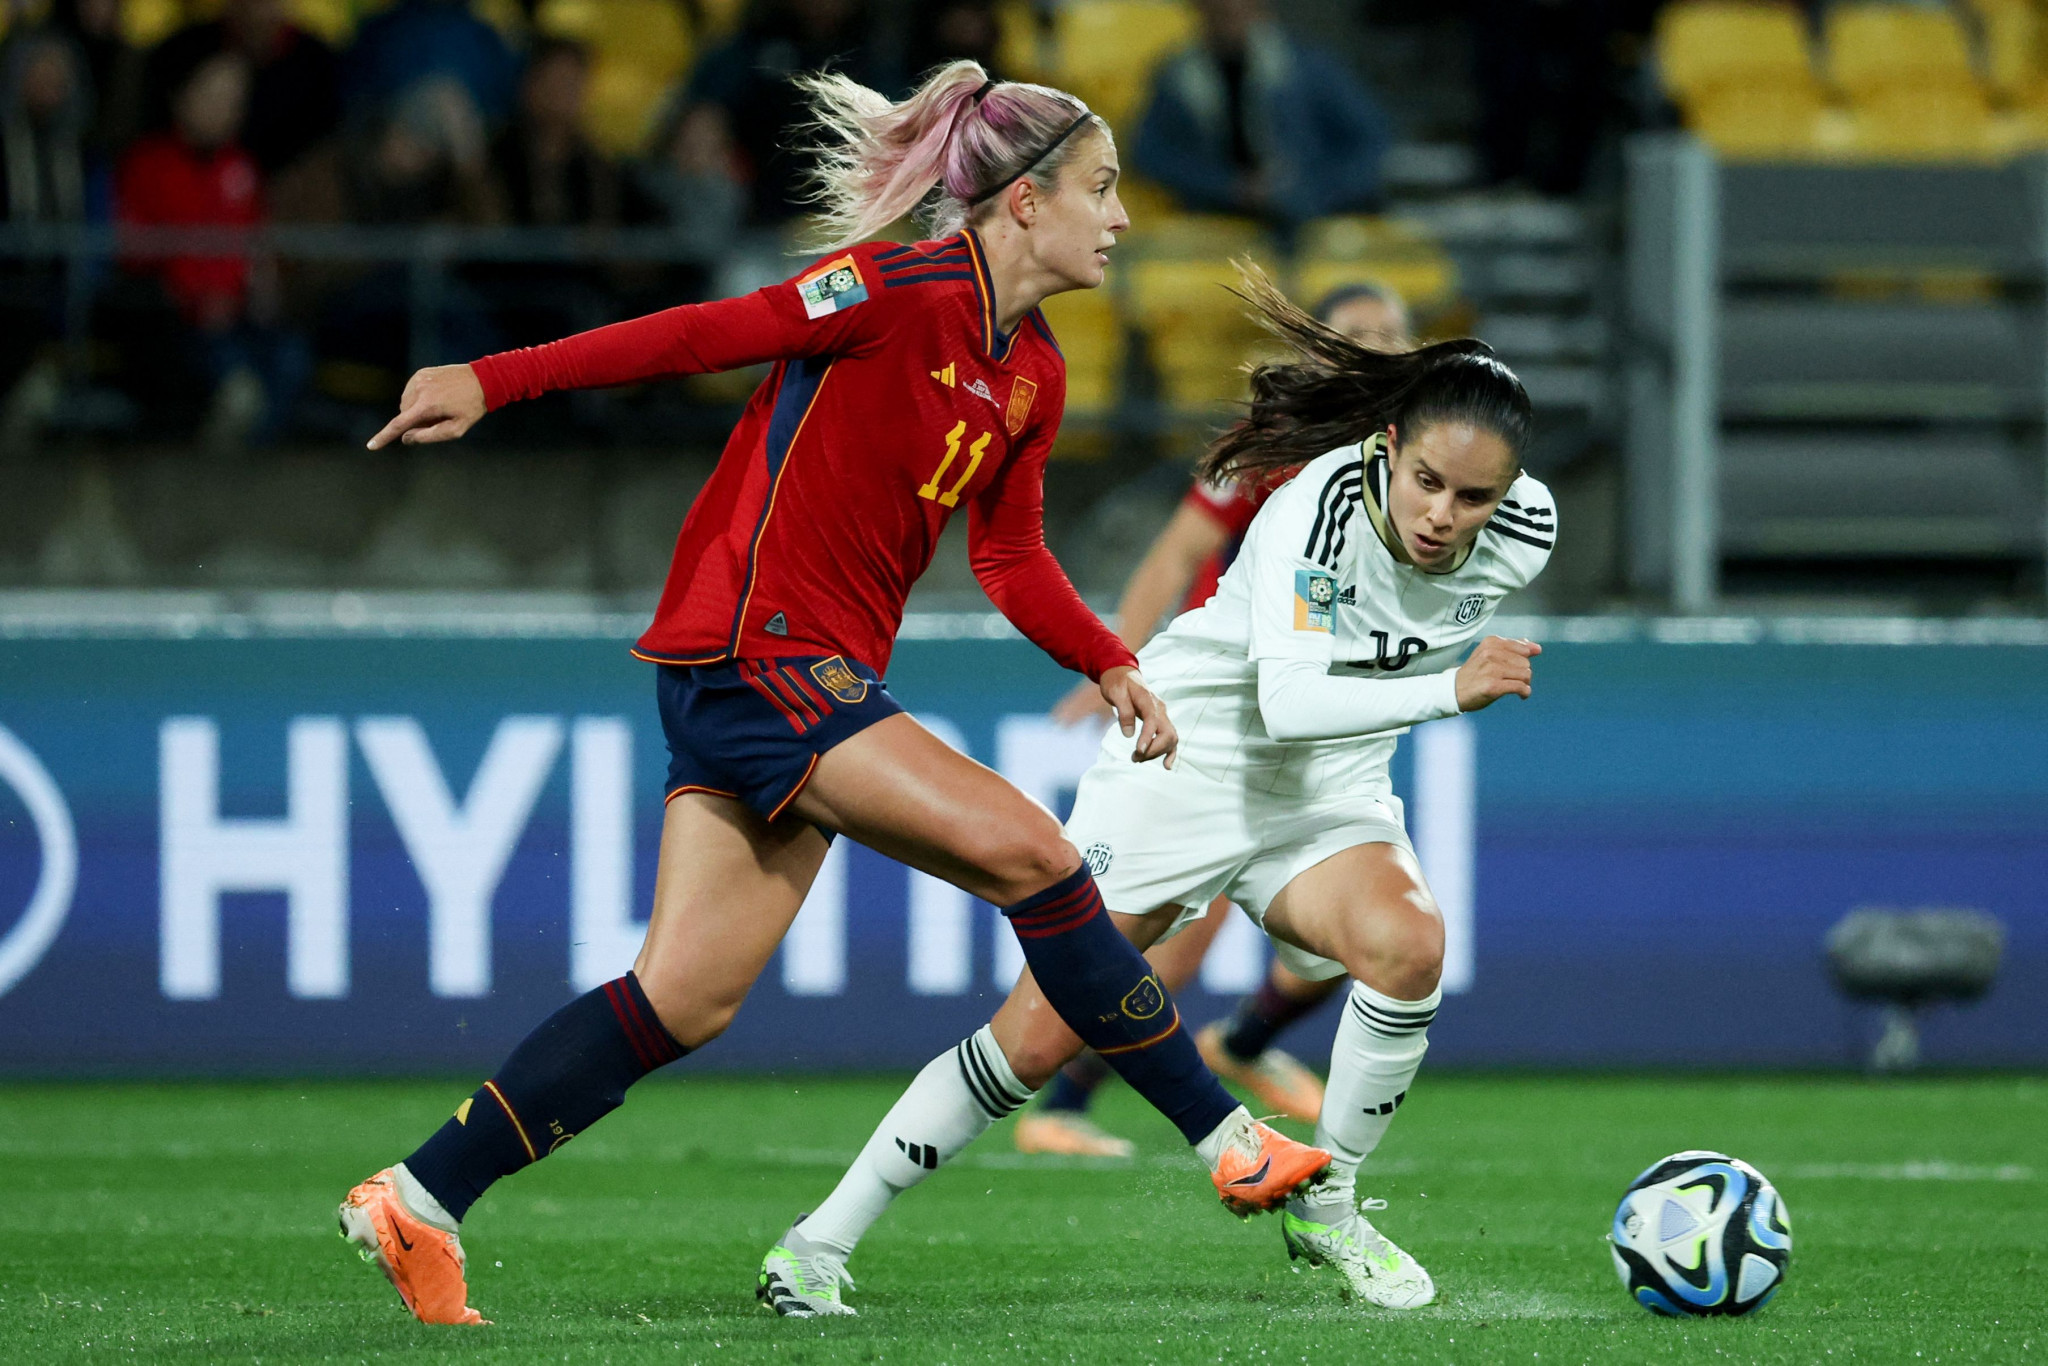 Back-to-back Best FIFA Women's Player award winner Alexia Putellas, left, missed last year's UEFA Women's European Championship for Spain with injury, but played the last 13 minutes as a substitute in Wellington ©Getty Images